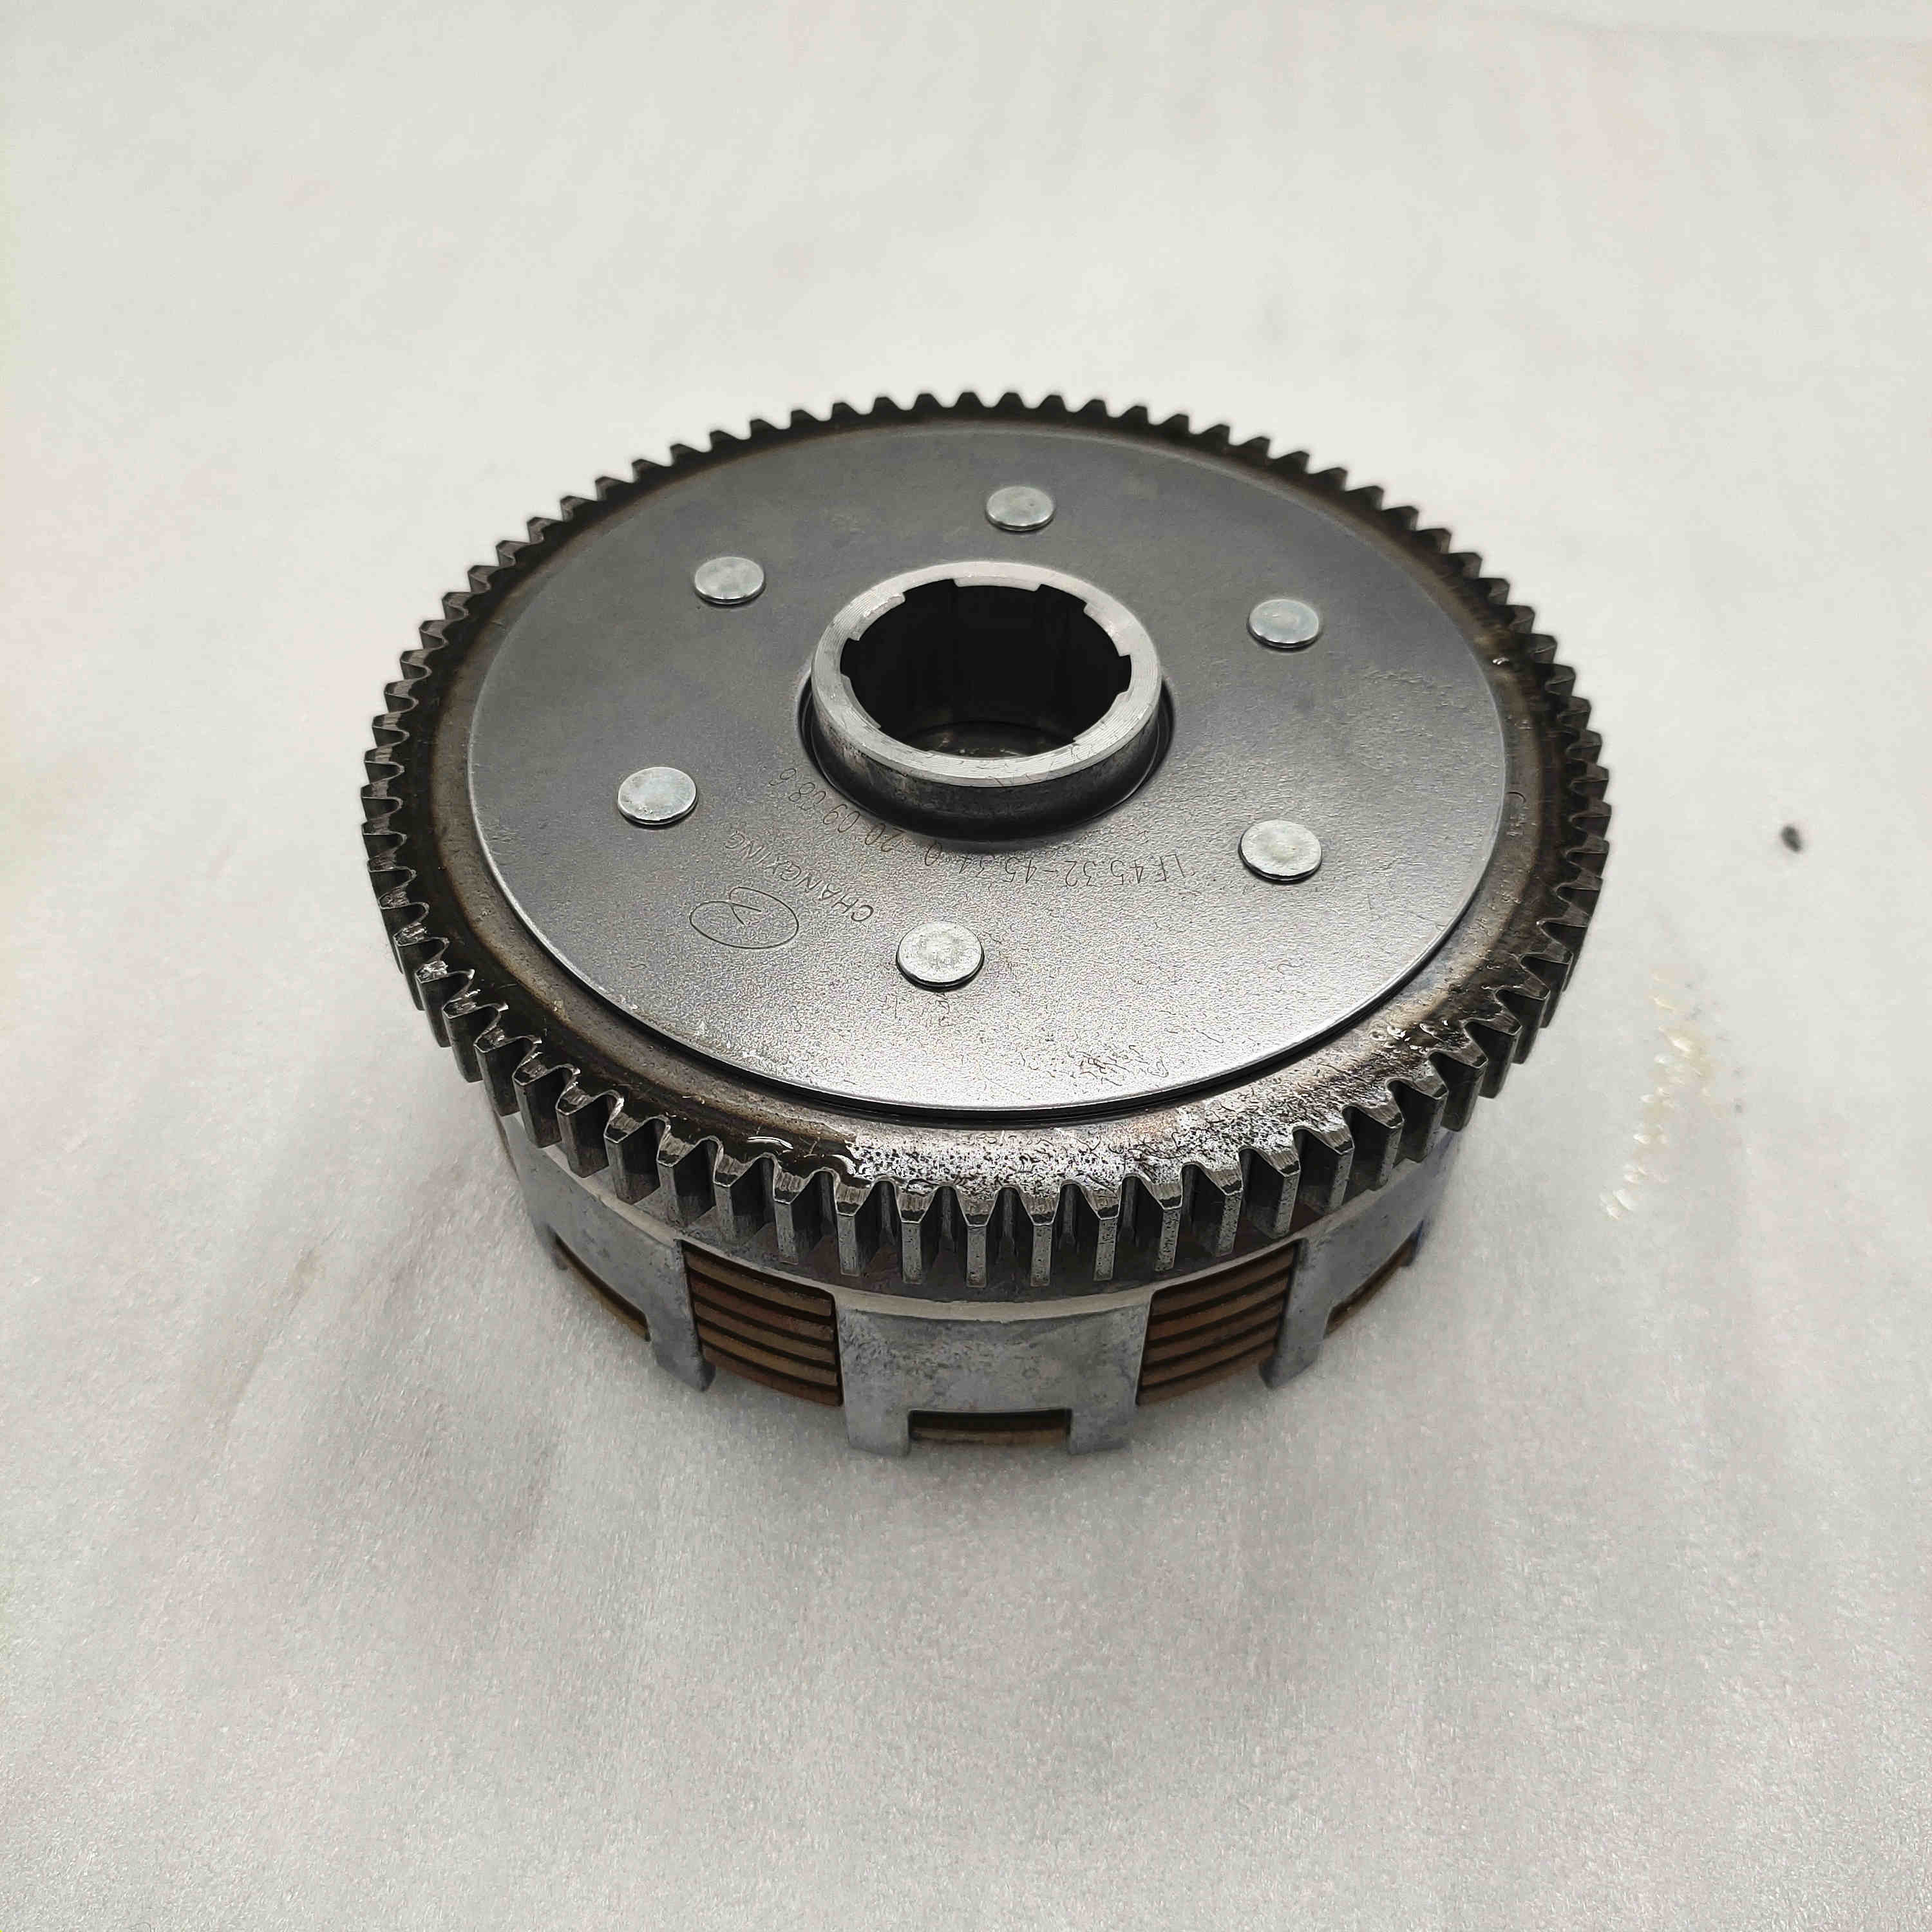 High quality Motorcycle Tricycle LIFAN 150cc engine clutch assembly Clutch plate disc clutch assembly Auto parts truck parts